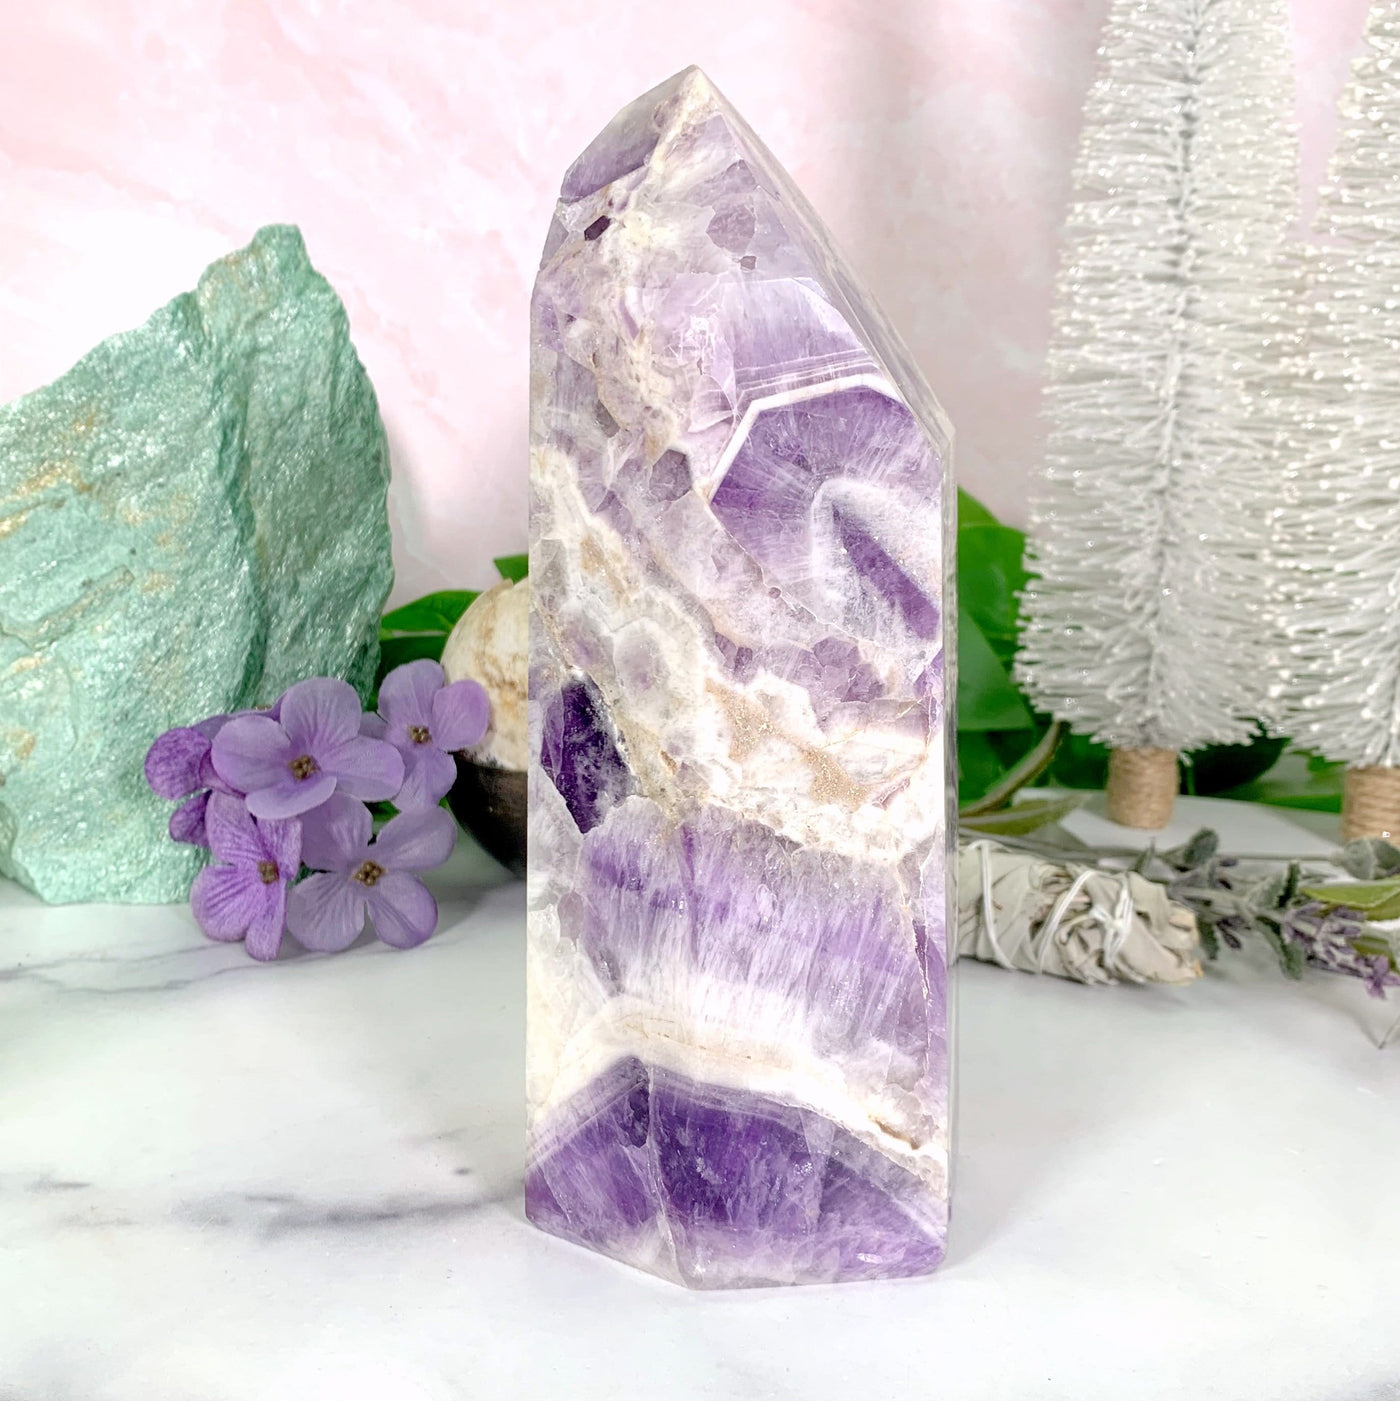 Chevron Amethyst Polished Tower with decorations in the background